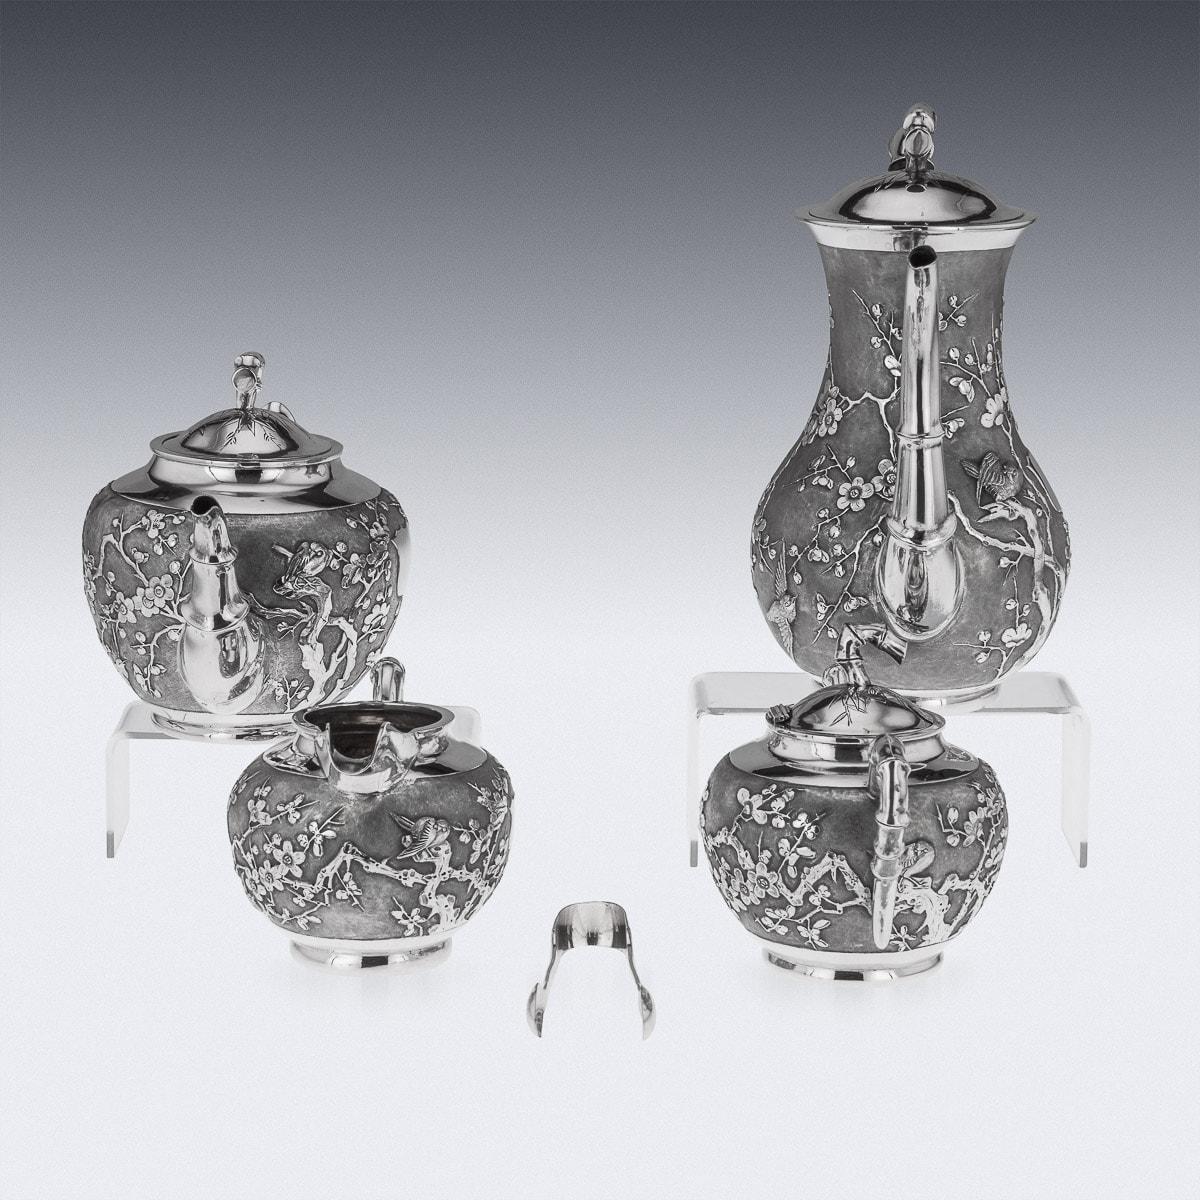 20th Century Chinese Solid Silver Cherry Blossom Tea Set, Siu Kee, circa 1900 For Sale 1